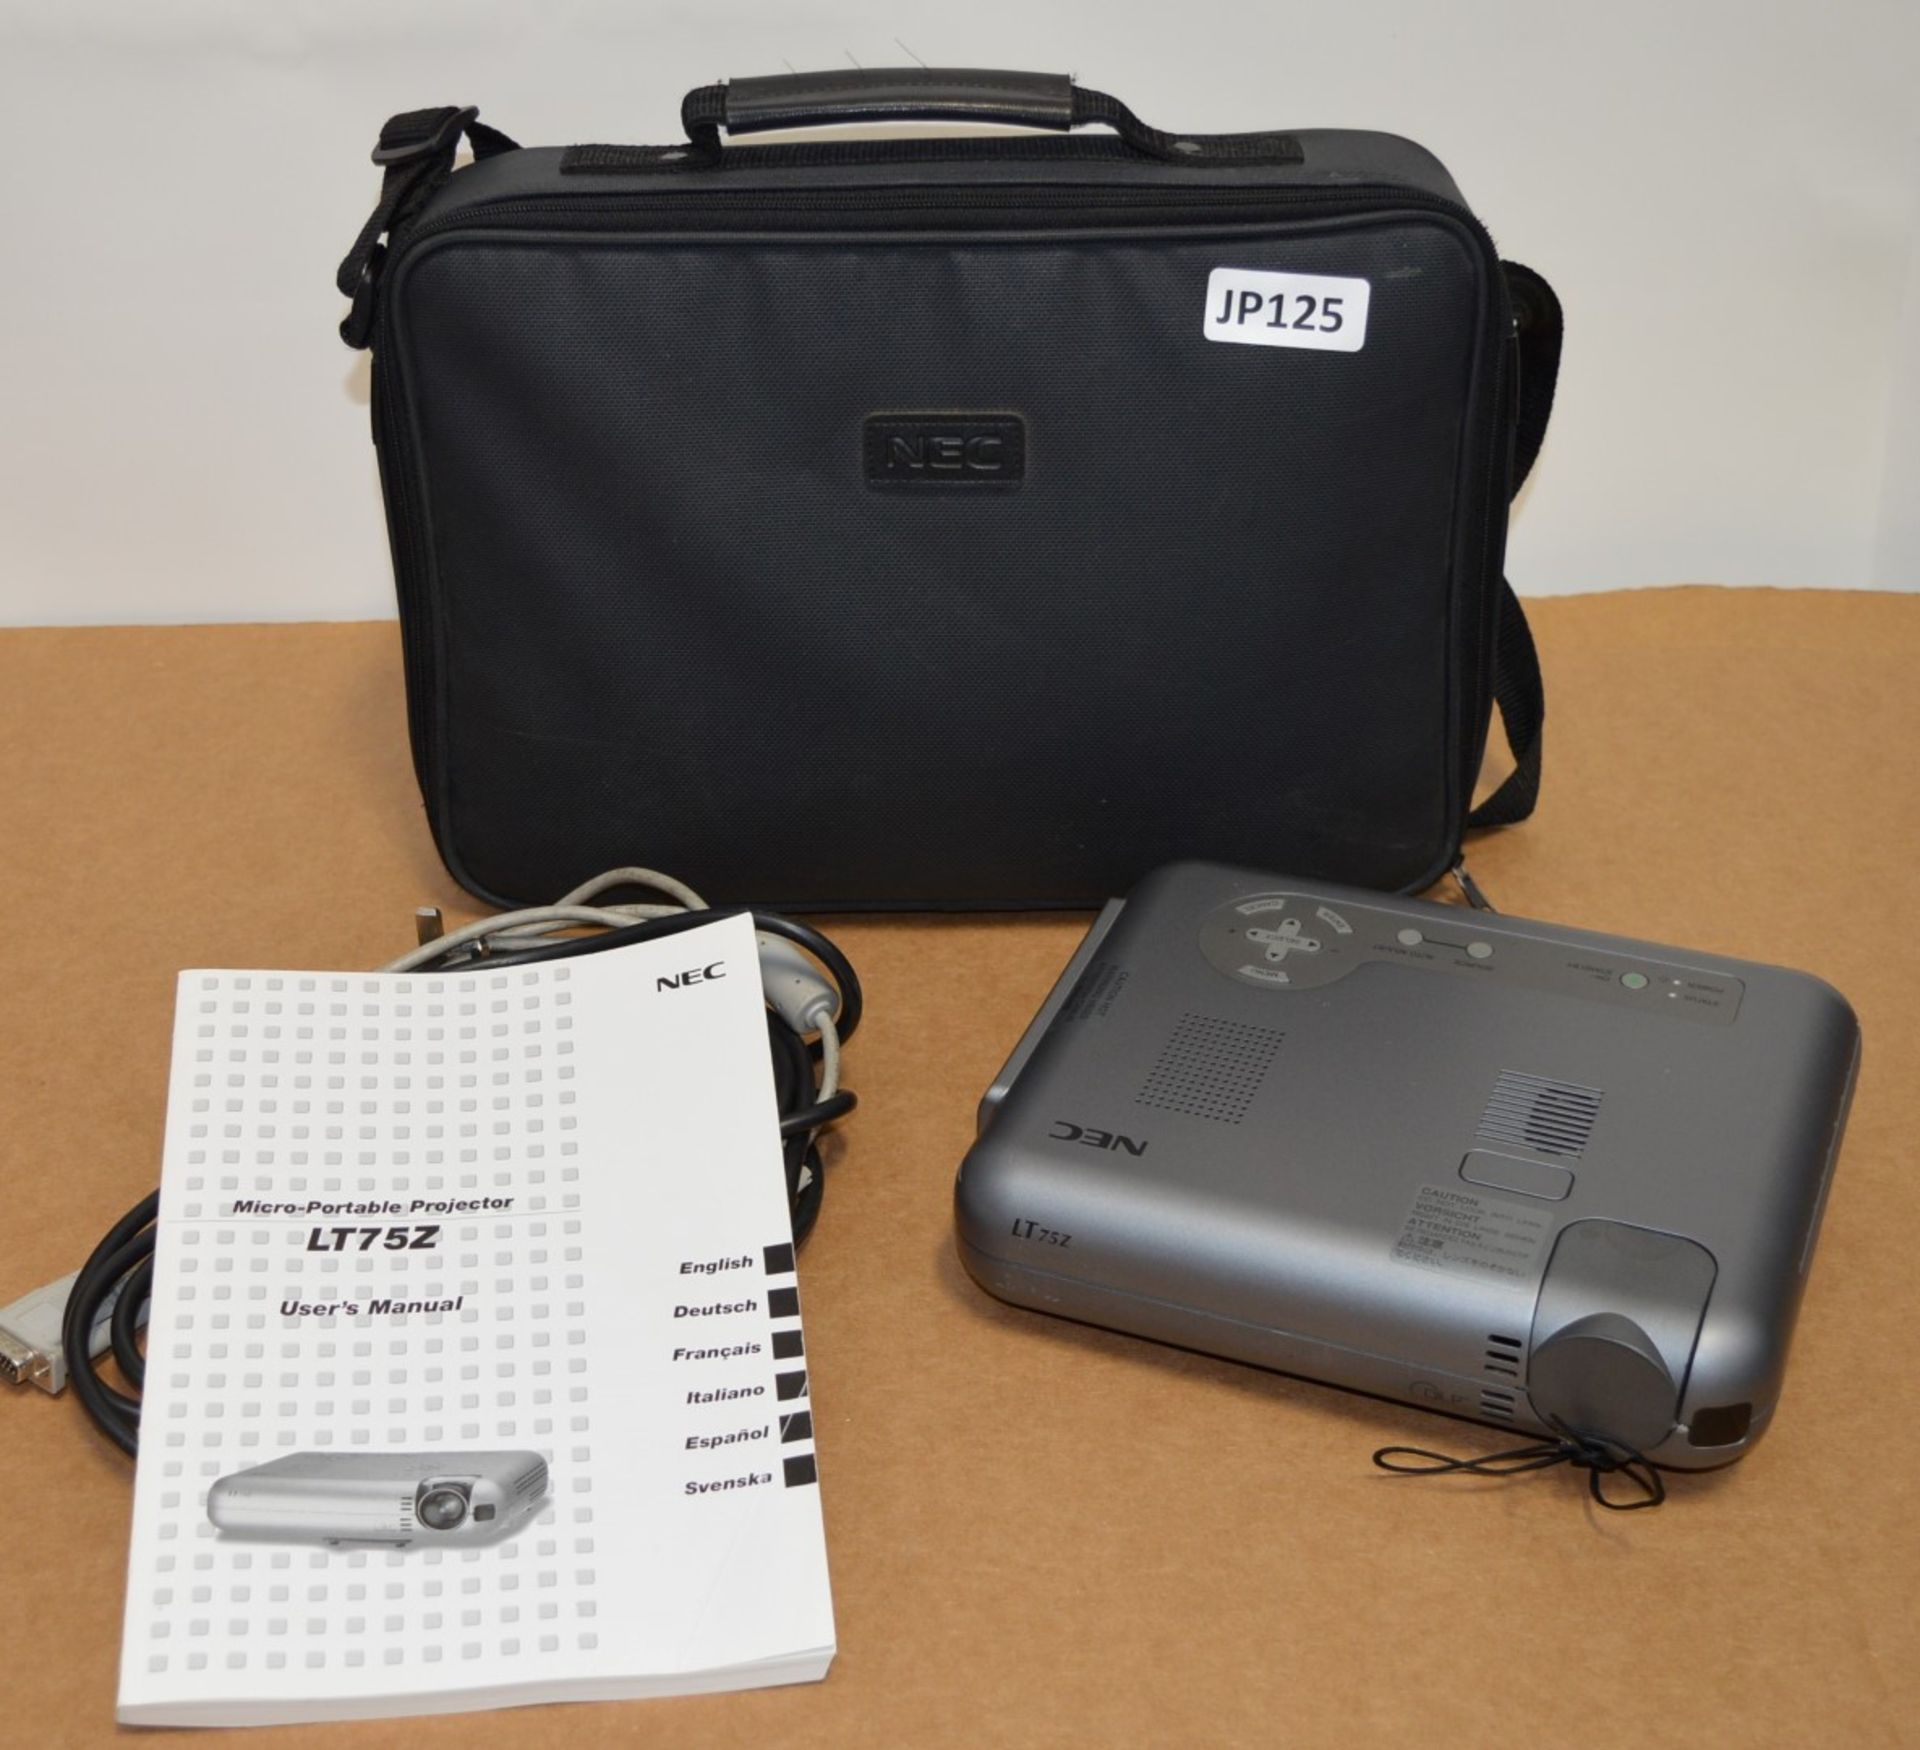 1 x NEC Micro Portable Projector - Model LT75Z - Includes Carry Case, Leads, Remote and User